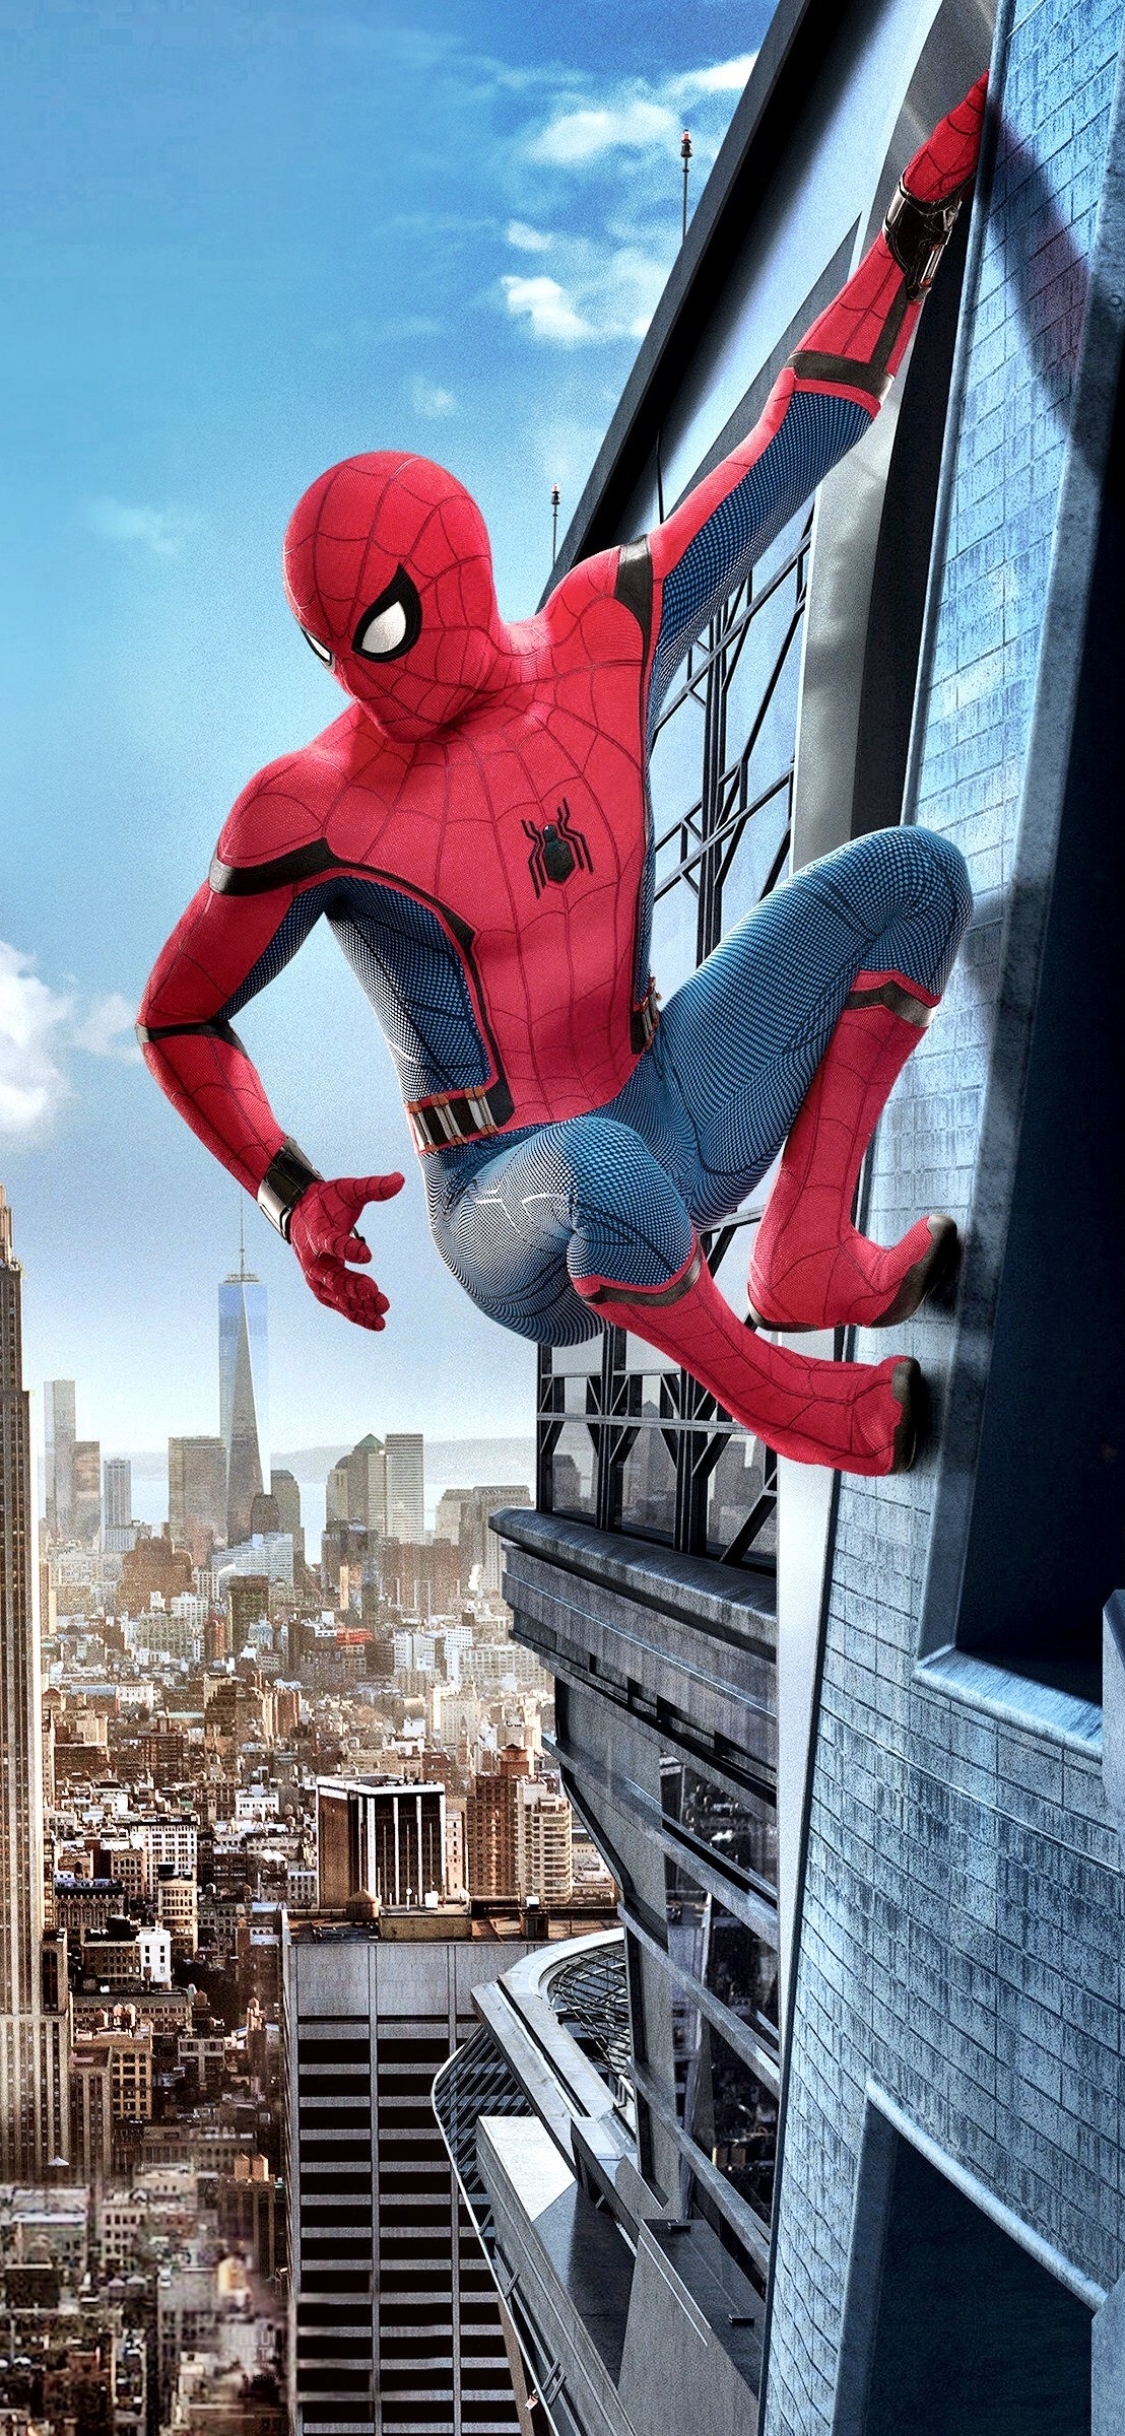 spider man: homecoming, empire state building, movie, new york, spider man, tom holland, building